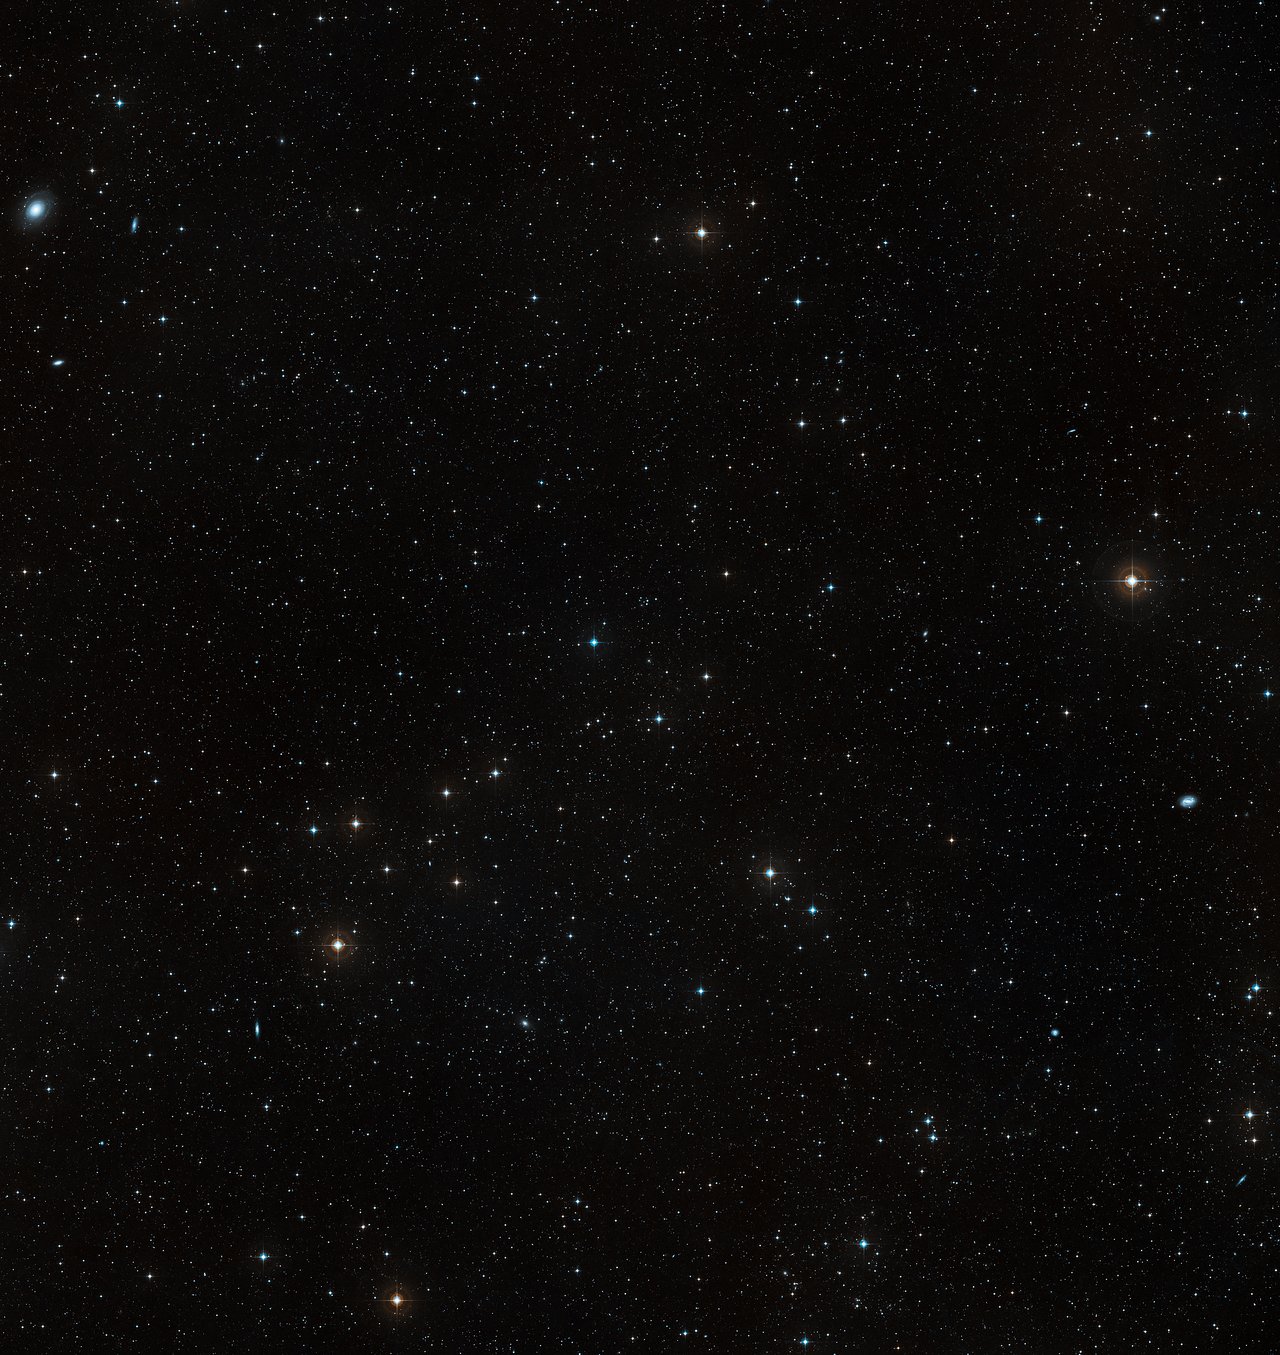 galaxy abell s1063 wide field image of  ground based